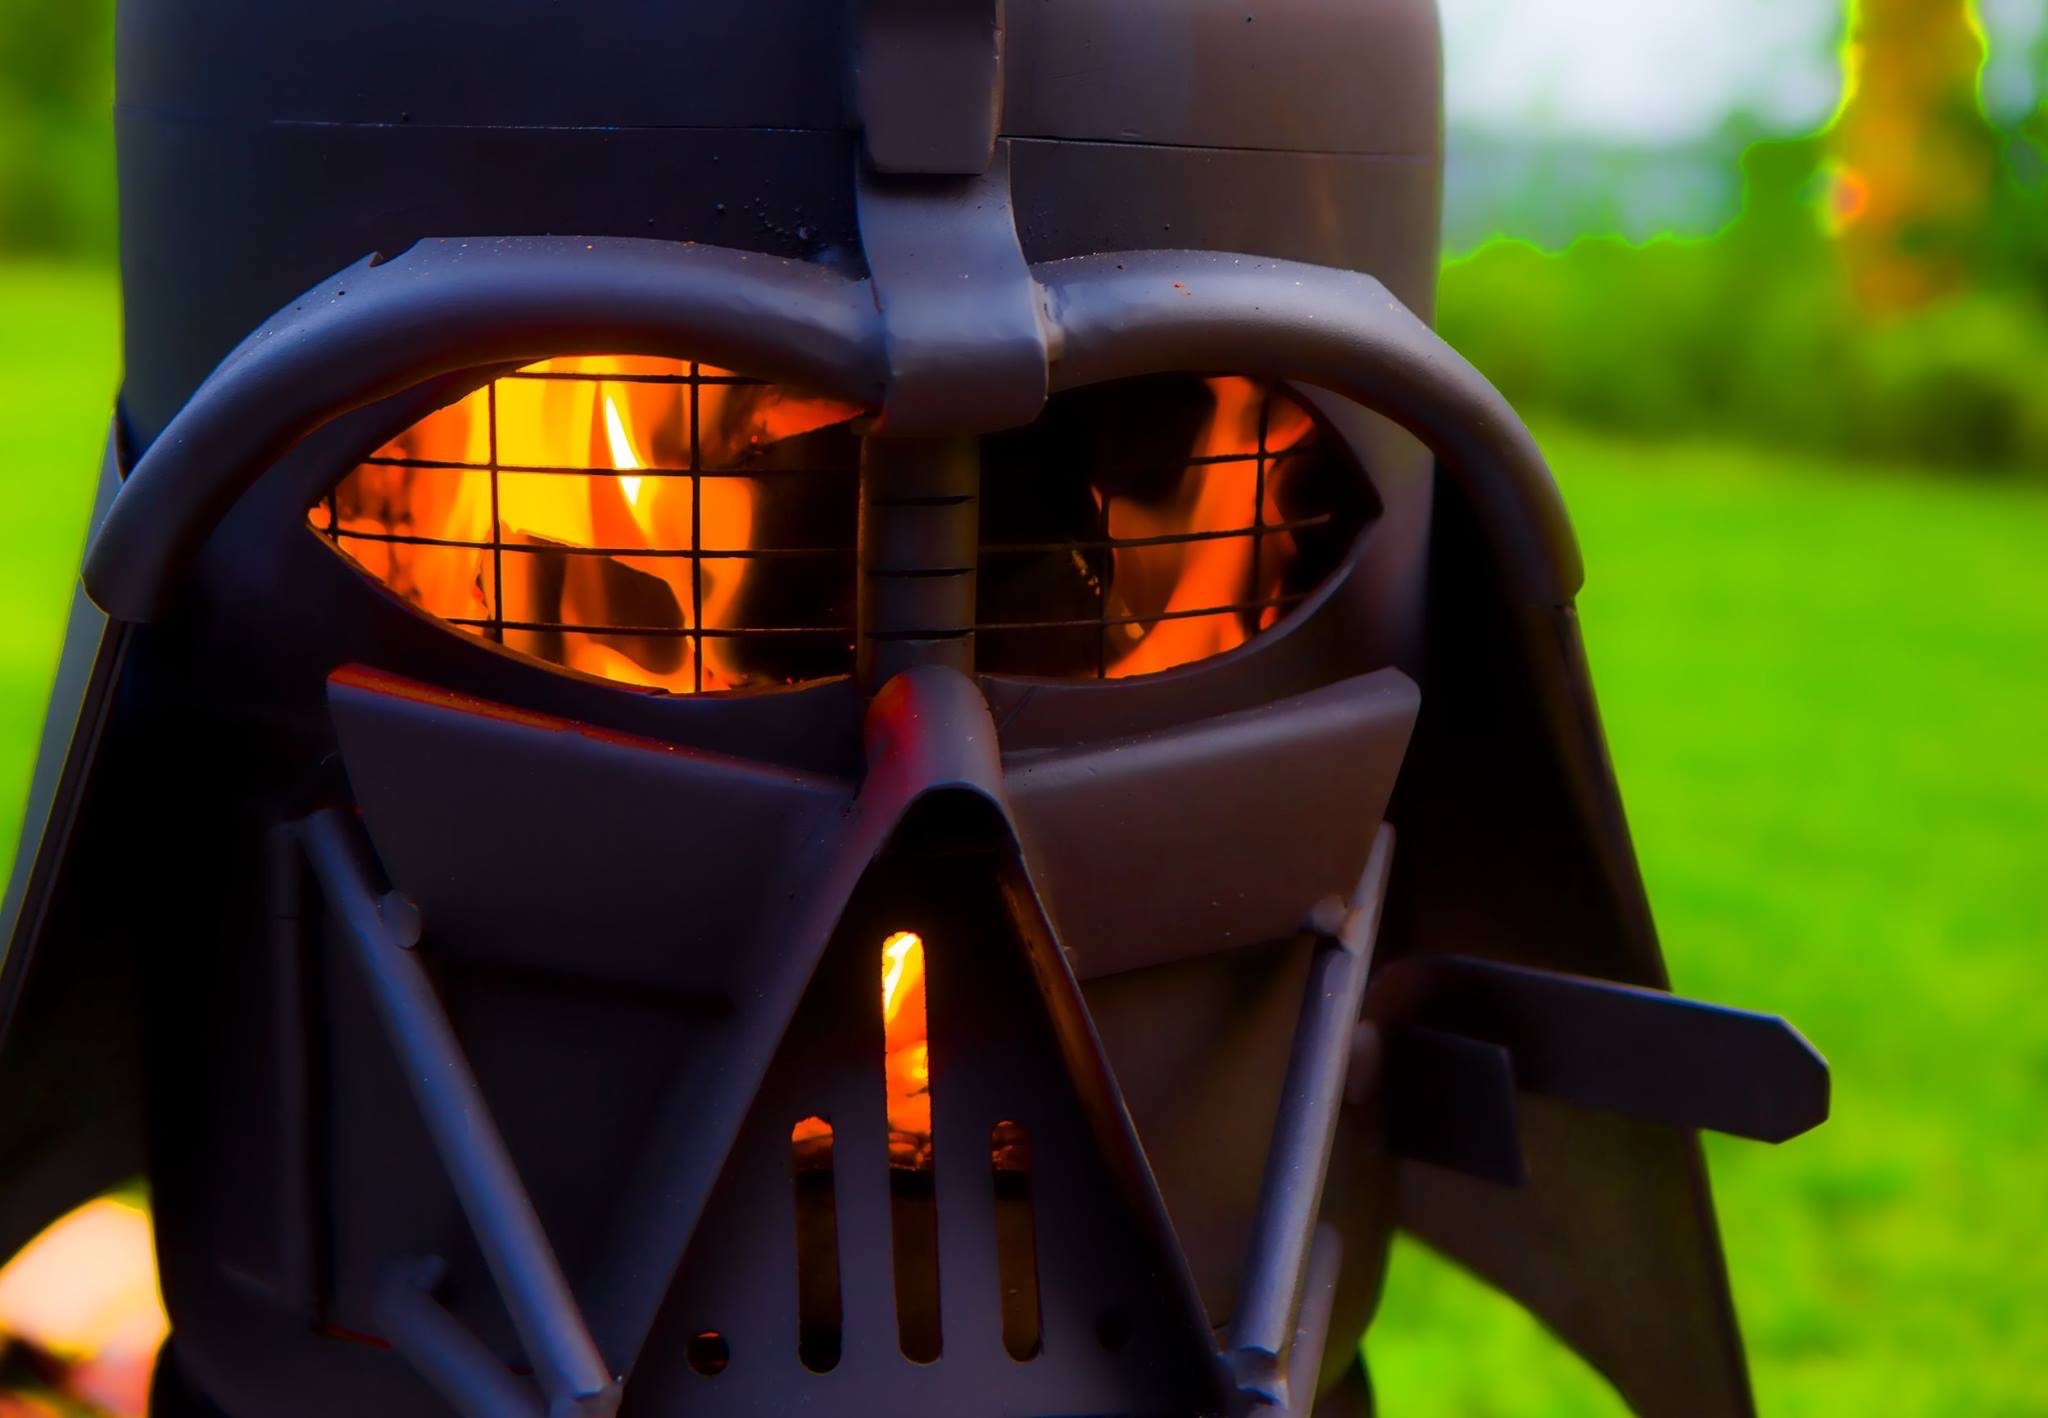 A custom made Star Wars Darth Vader fire pit with flames in the eyes, close up, with grass background